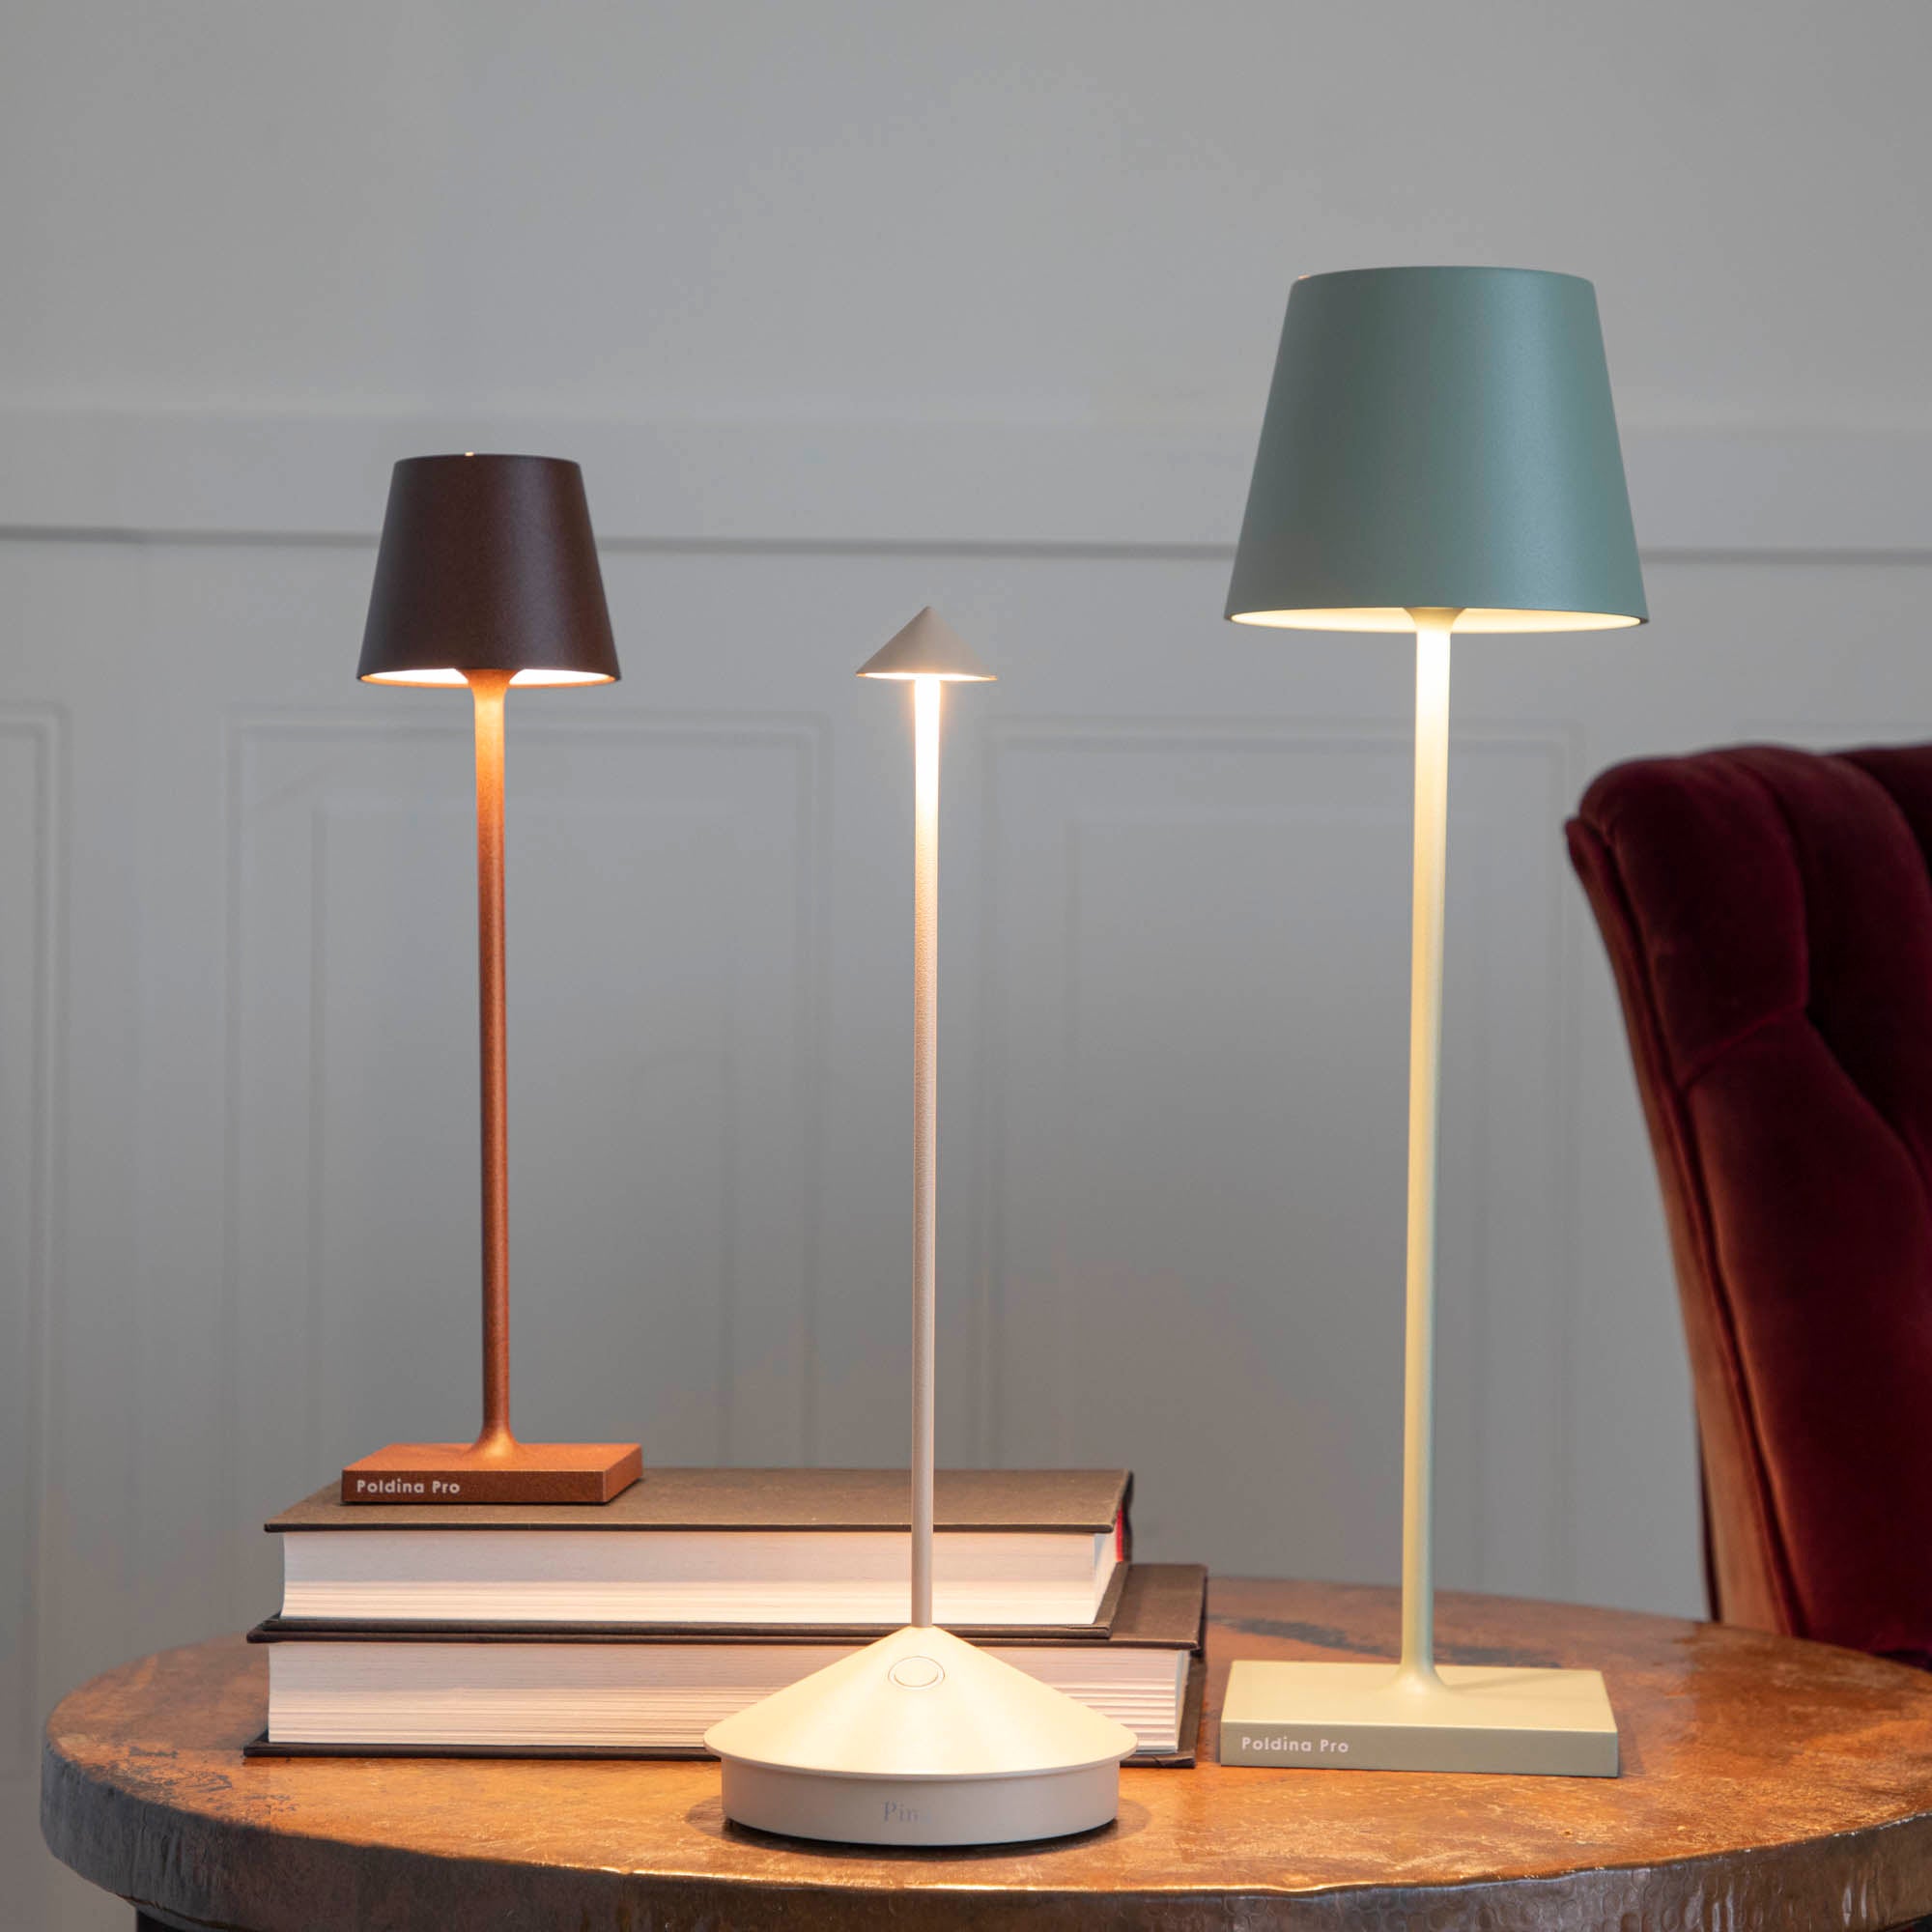 A Sand Micro Cordless Lamp by Zafferano on a table next to a book and a plant.